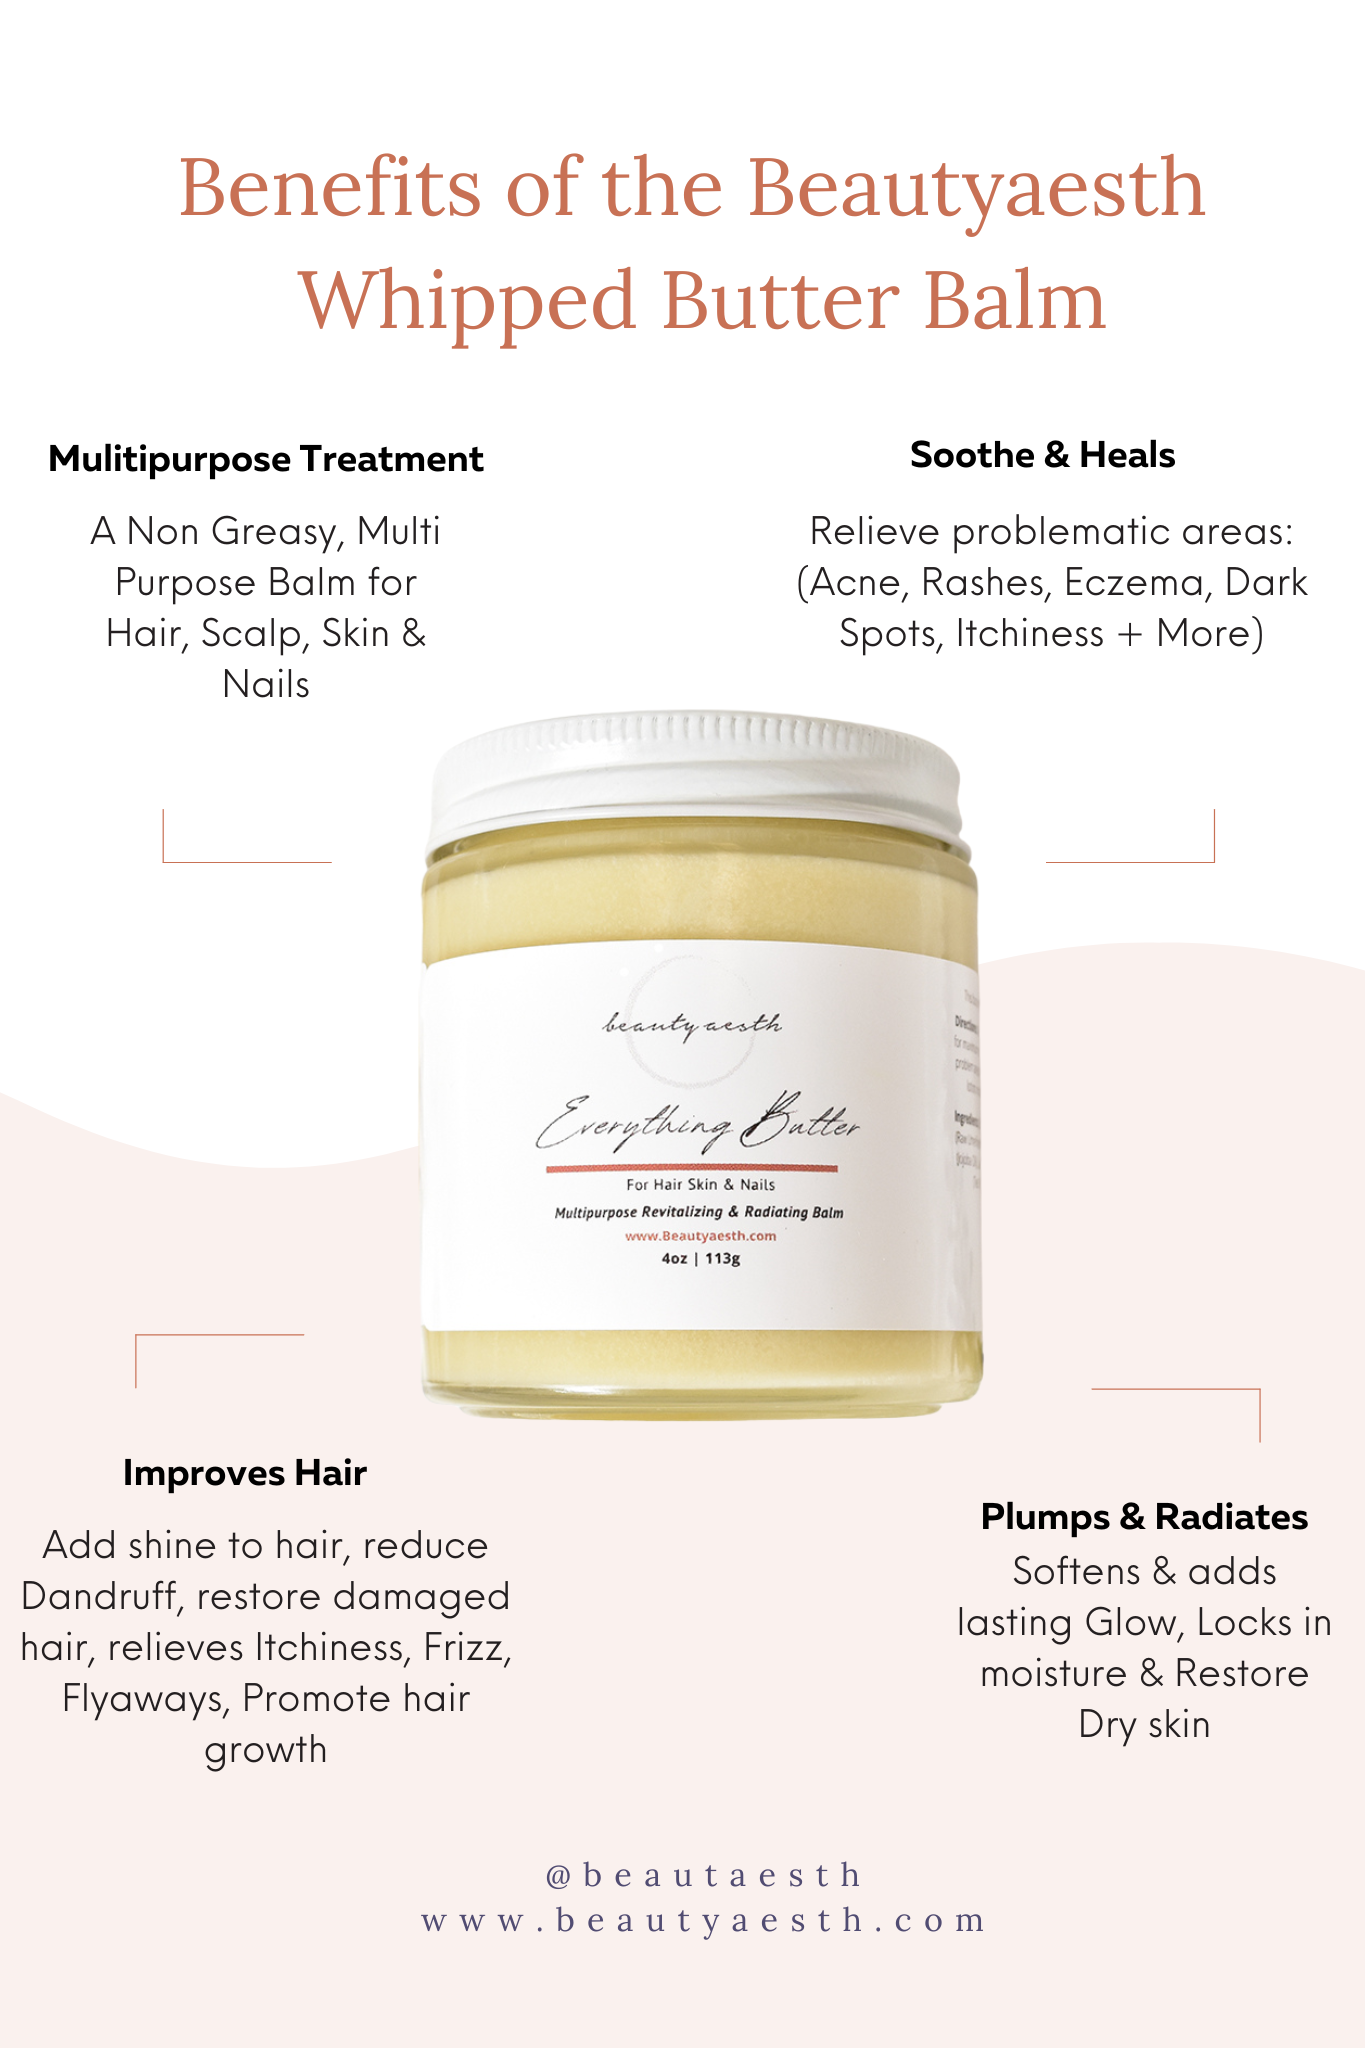 Everything Butter Balm｜All Purpose Body Butter for Skin & Hair